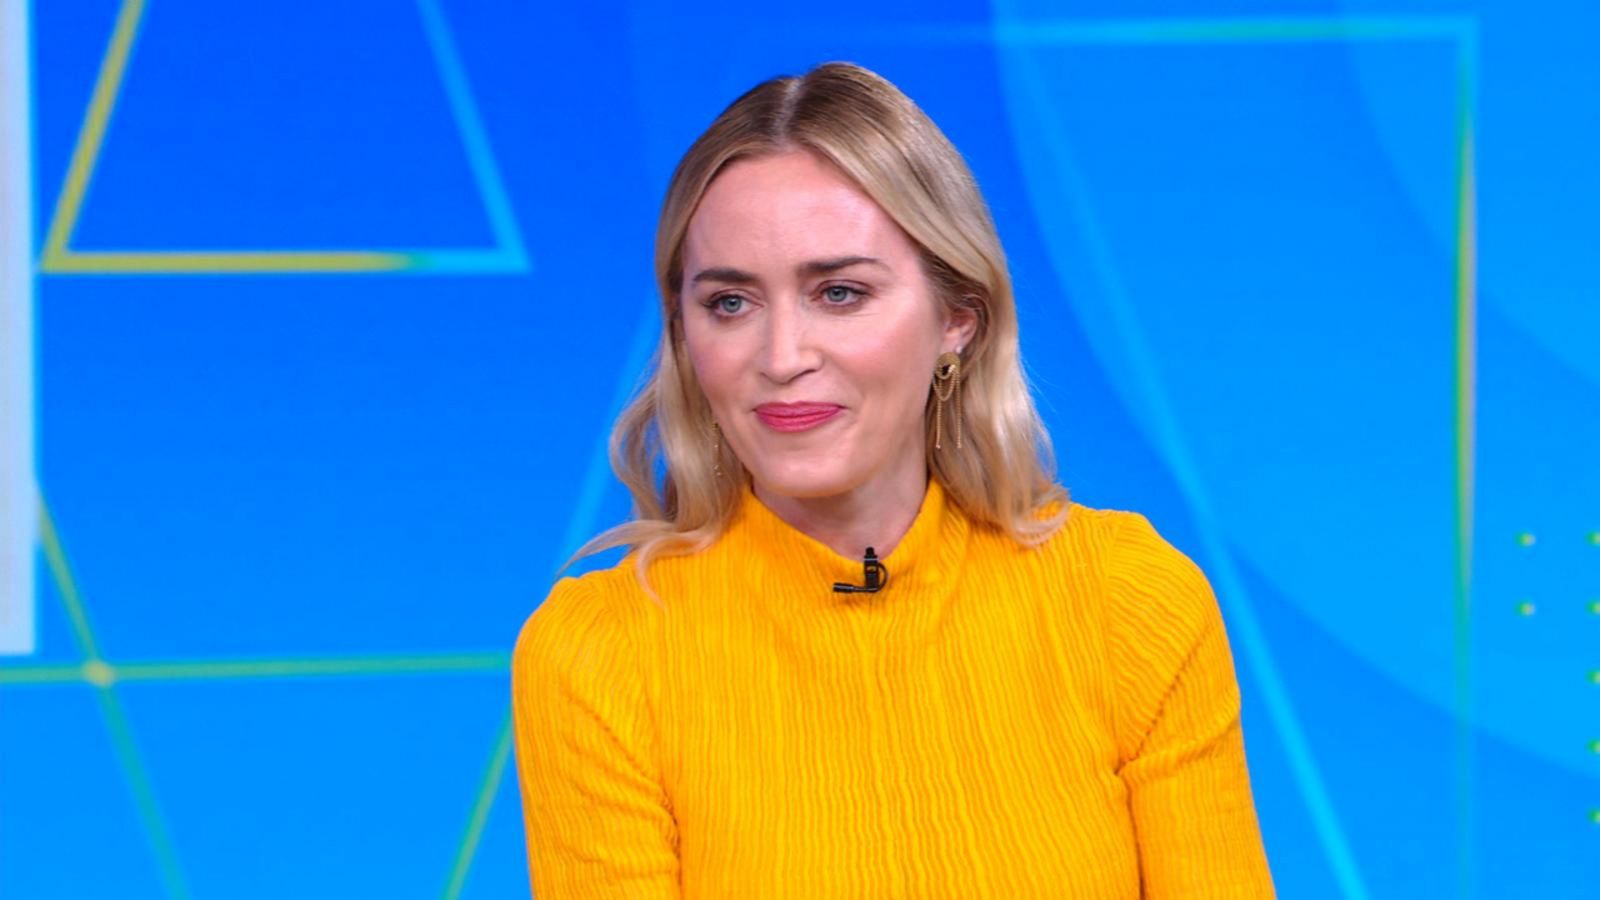 Emily Blunt talks new Western miniseries, 'The English' Good Morning